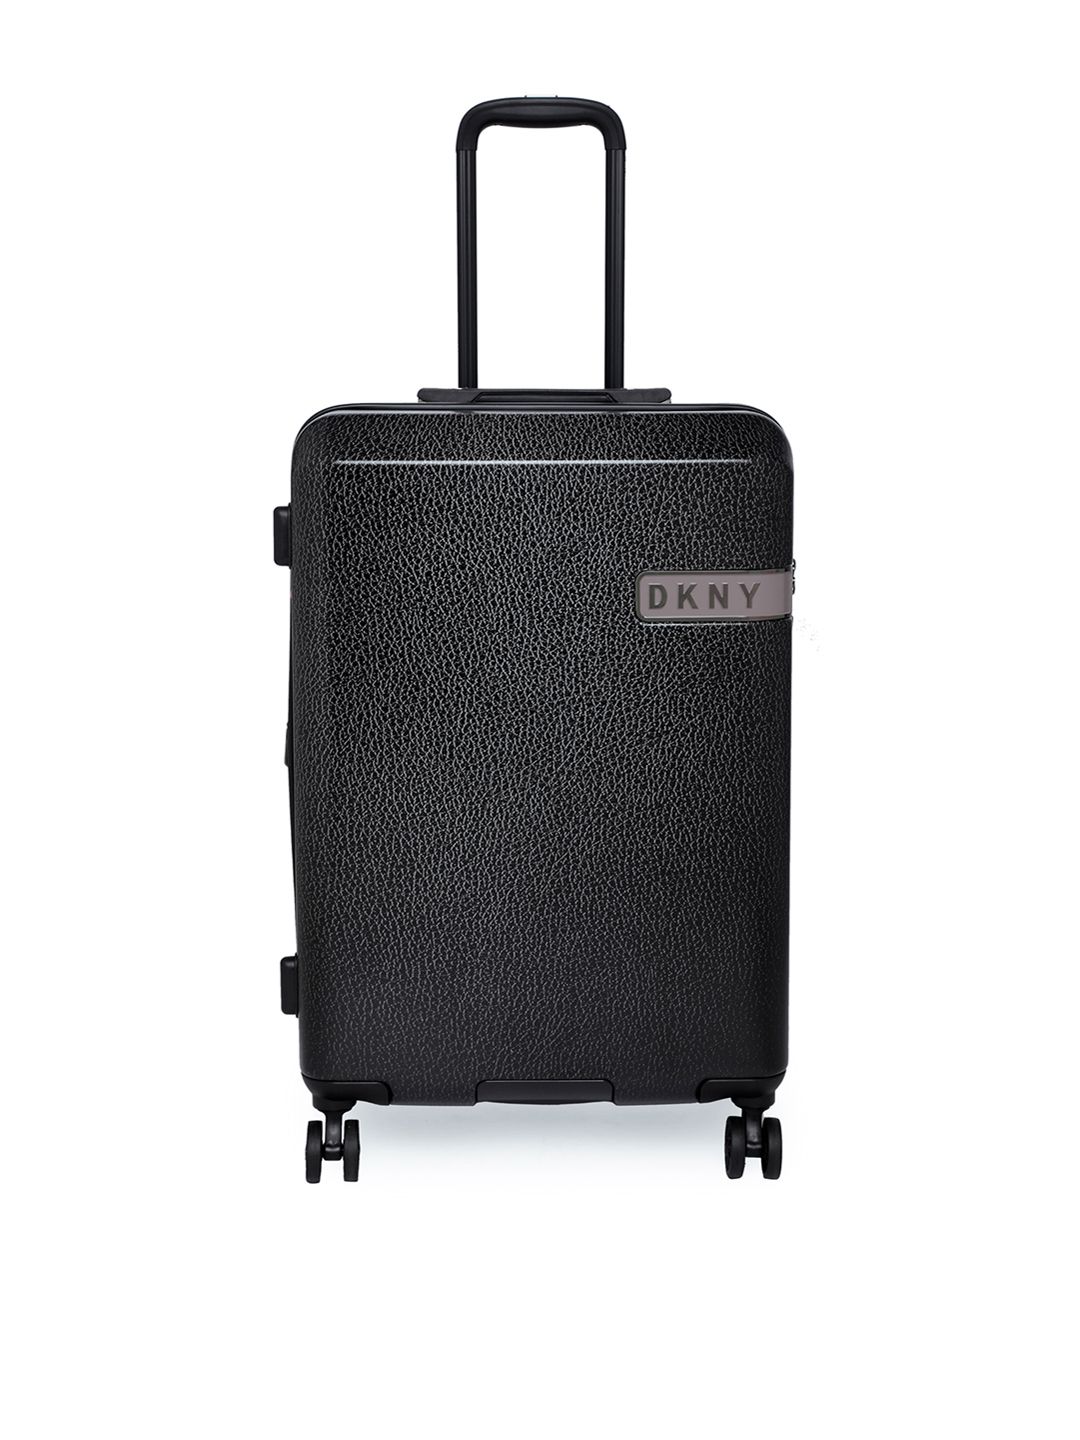 DKNY Black & Grey Textured Hard-Sided Medium Trolley Suitcase Price in India